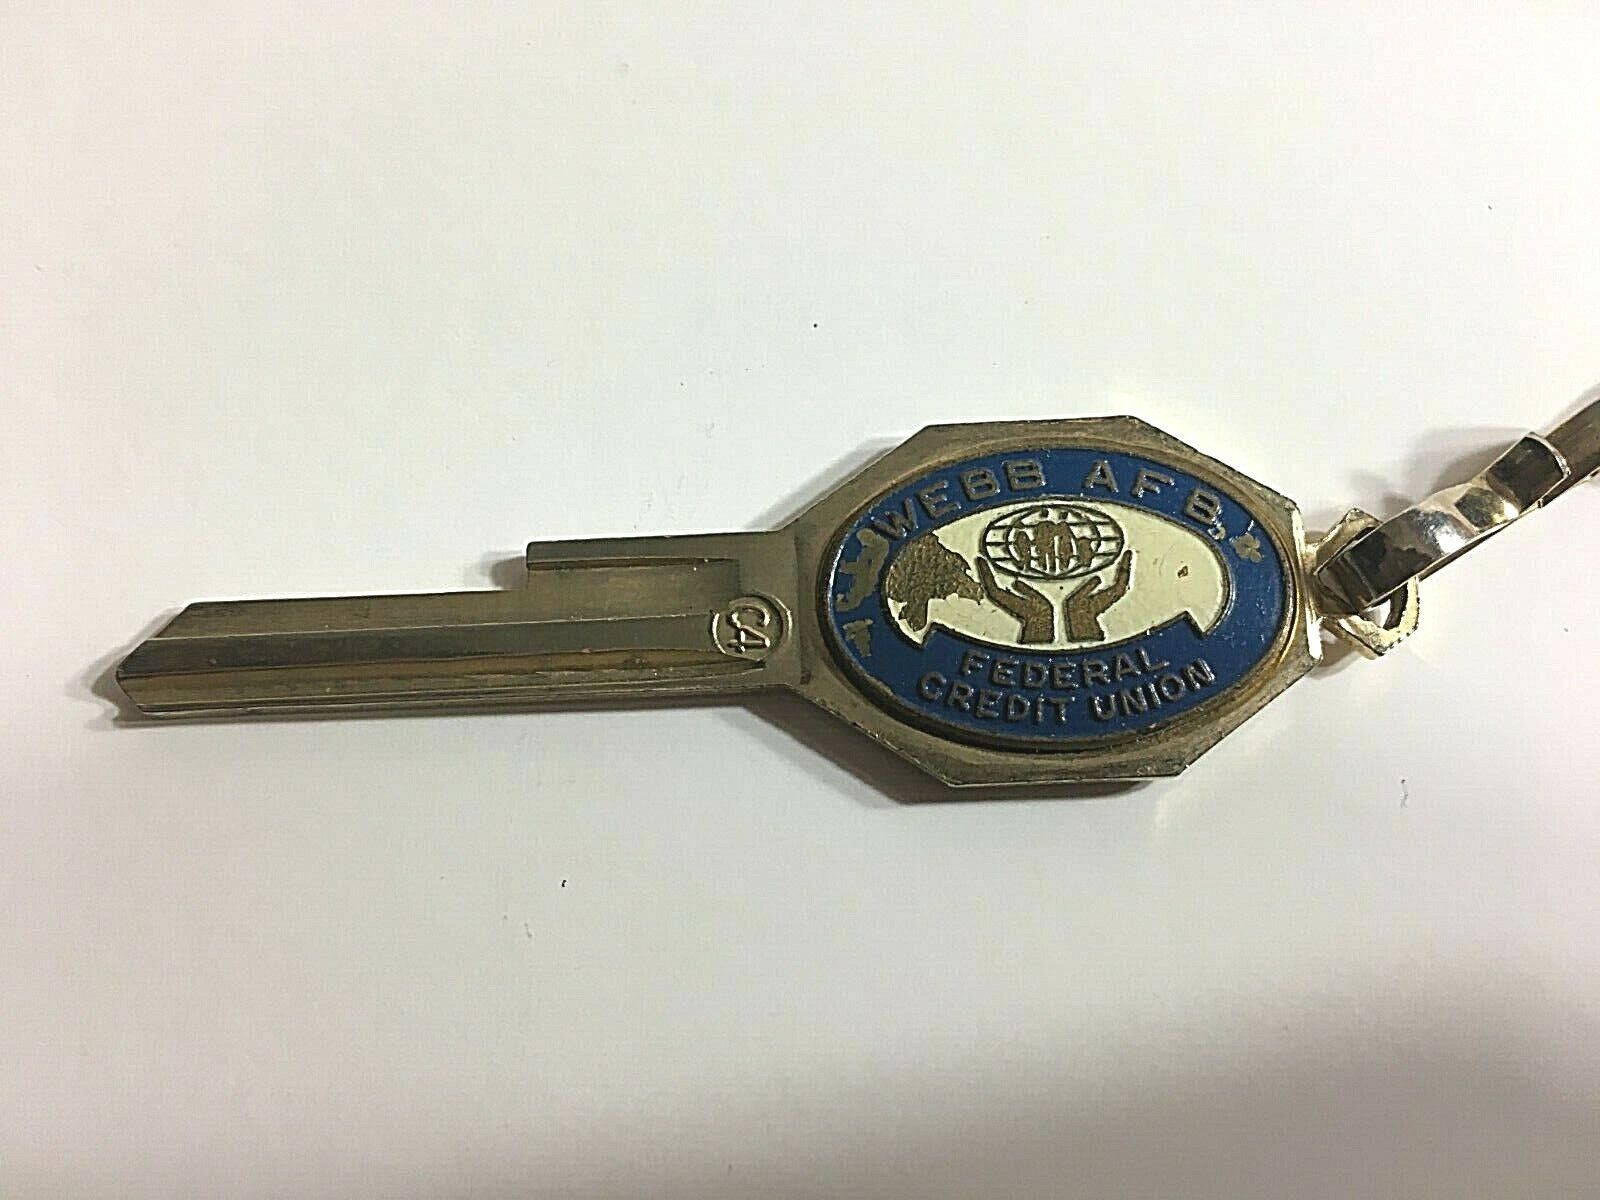 Collectible WWII Webber Air Force Base Federal Credit Union Key 